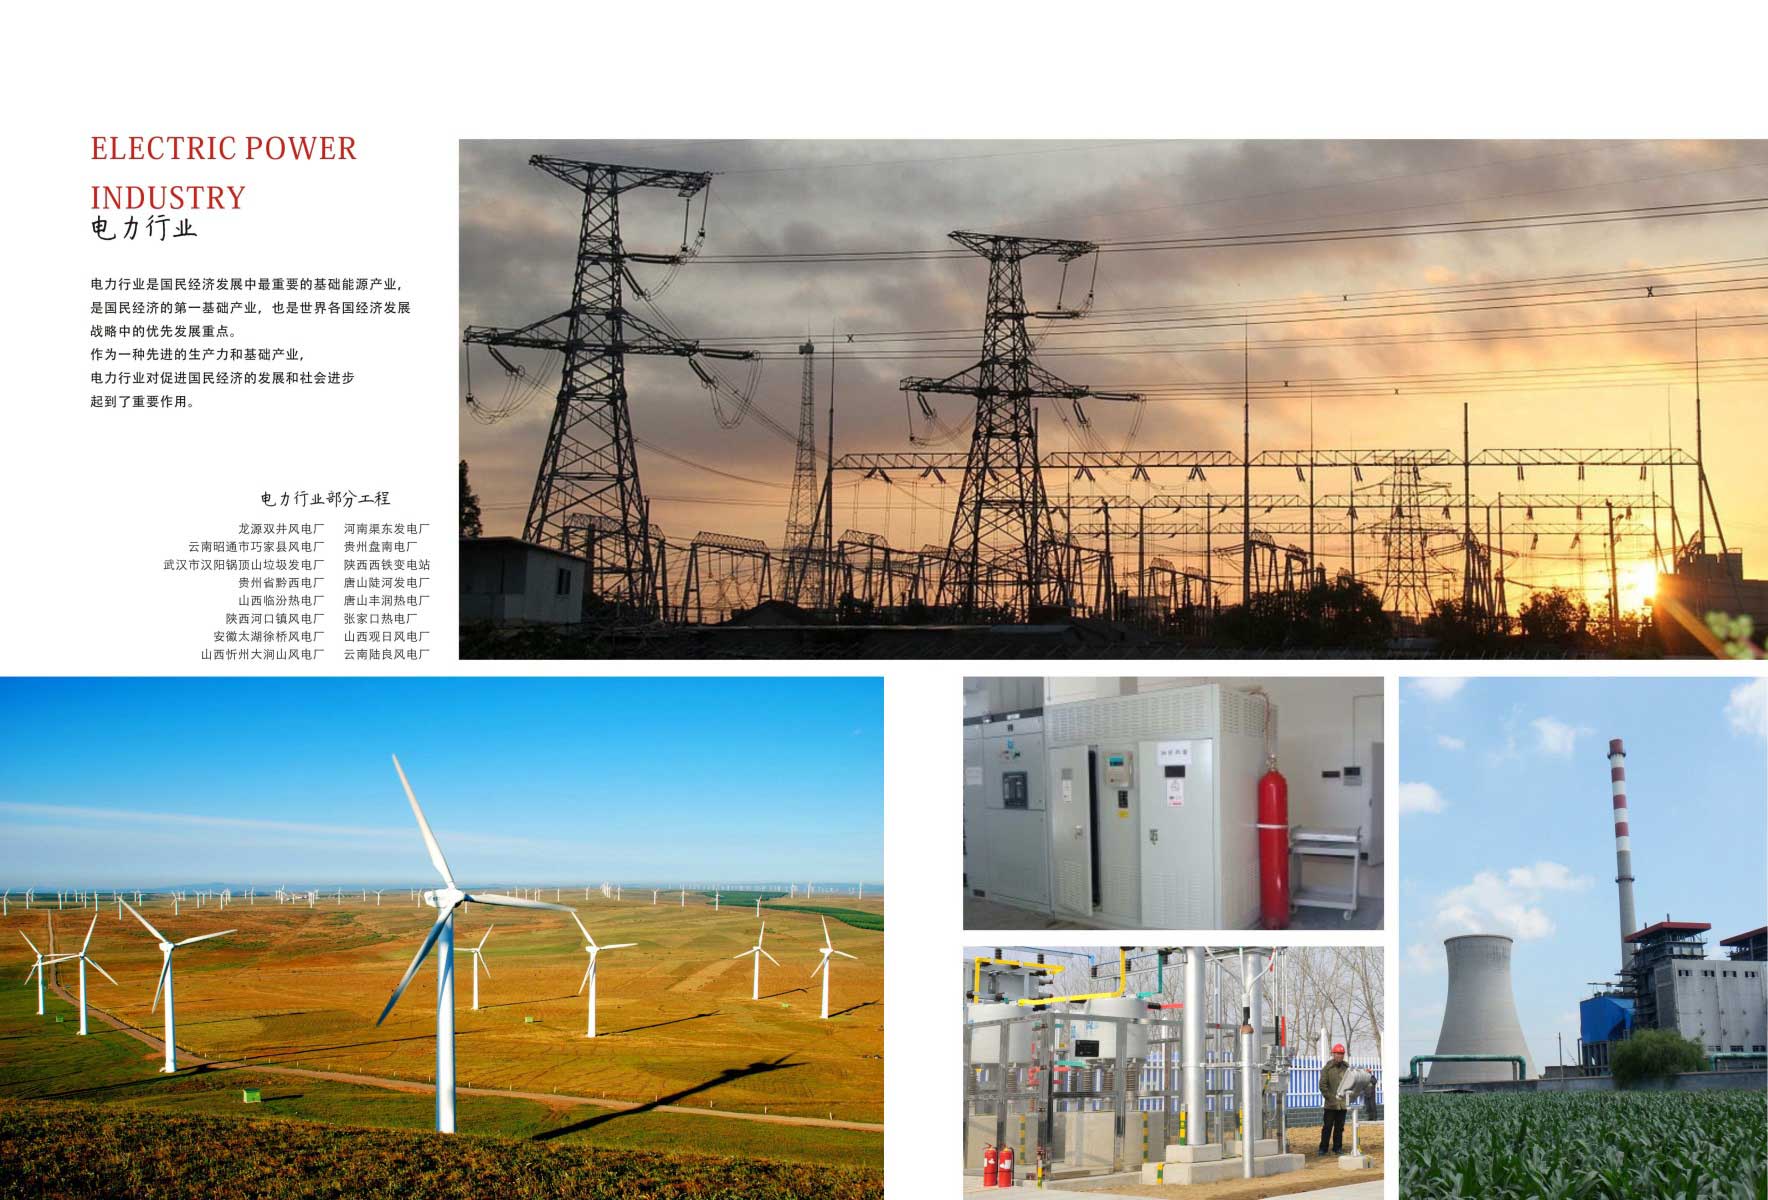 Electric power industry